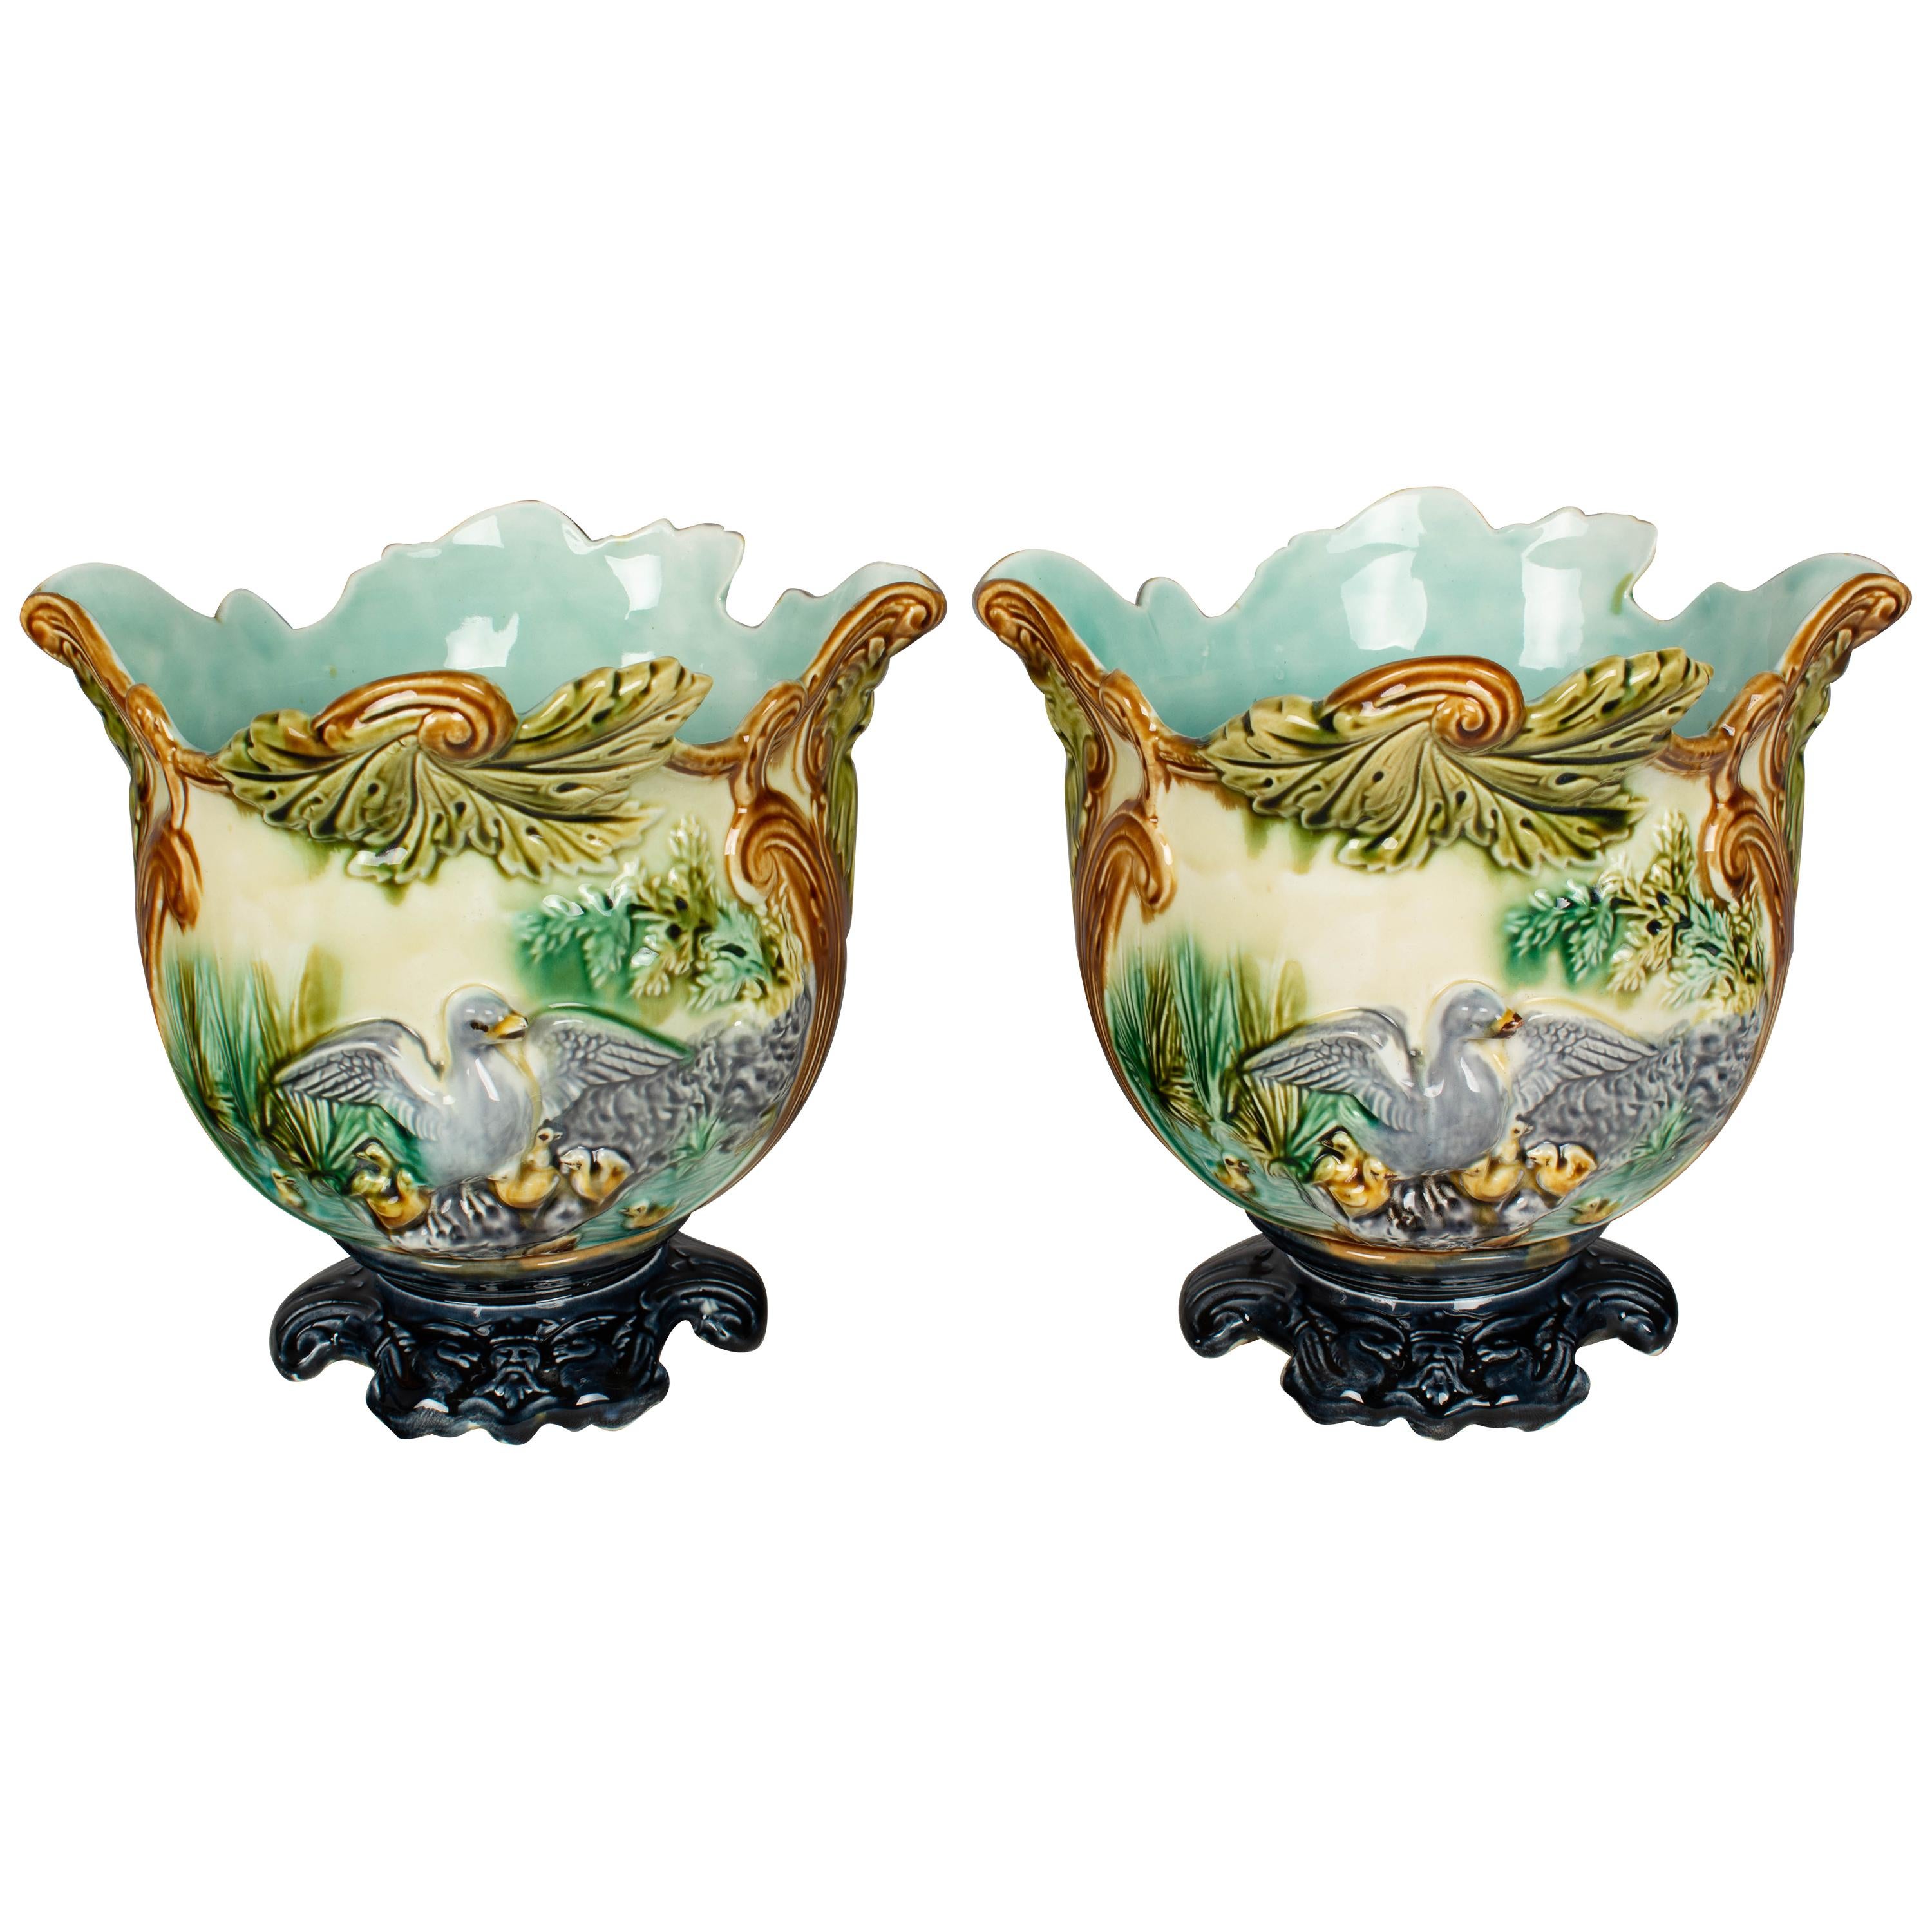 Pair of French Green Majolica Cache Pots